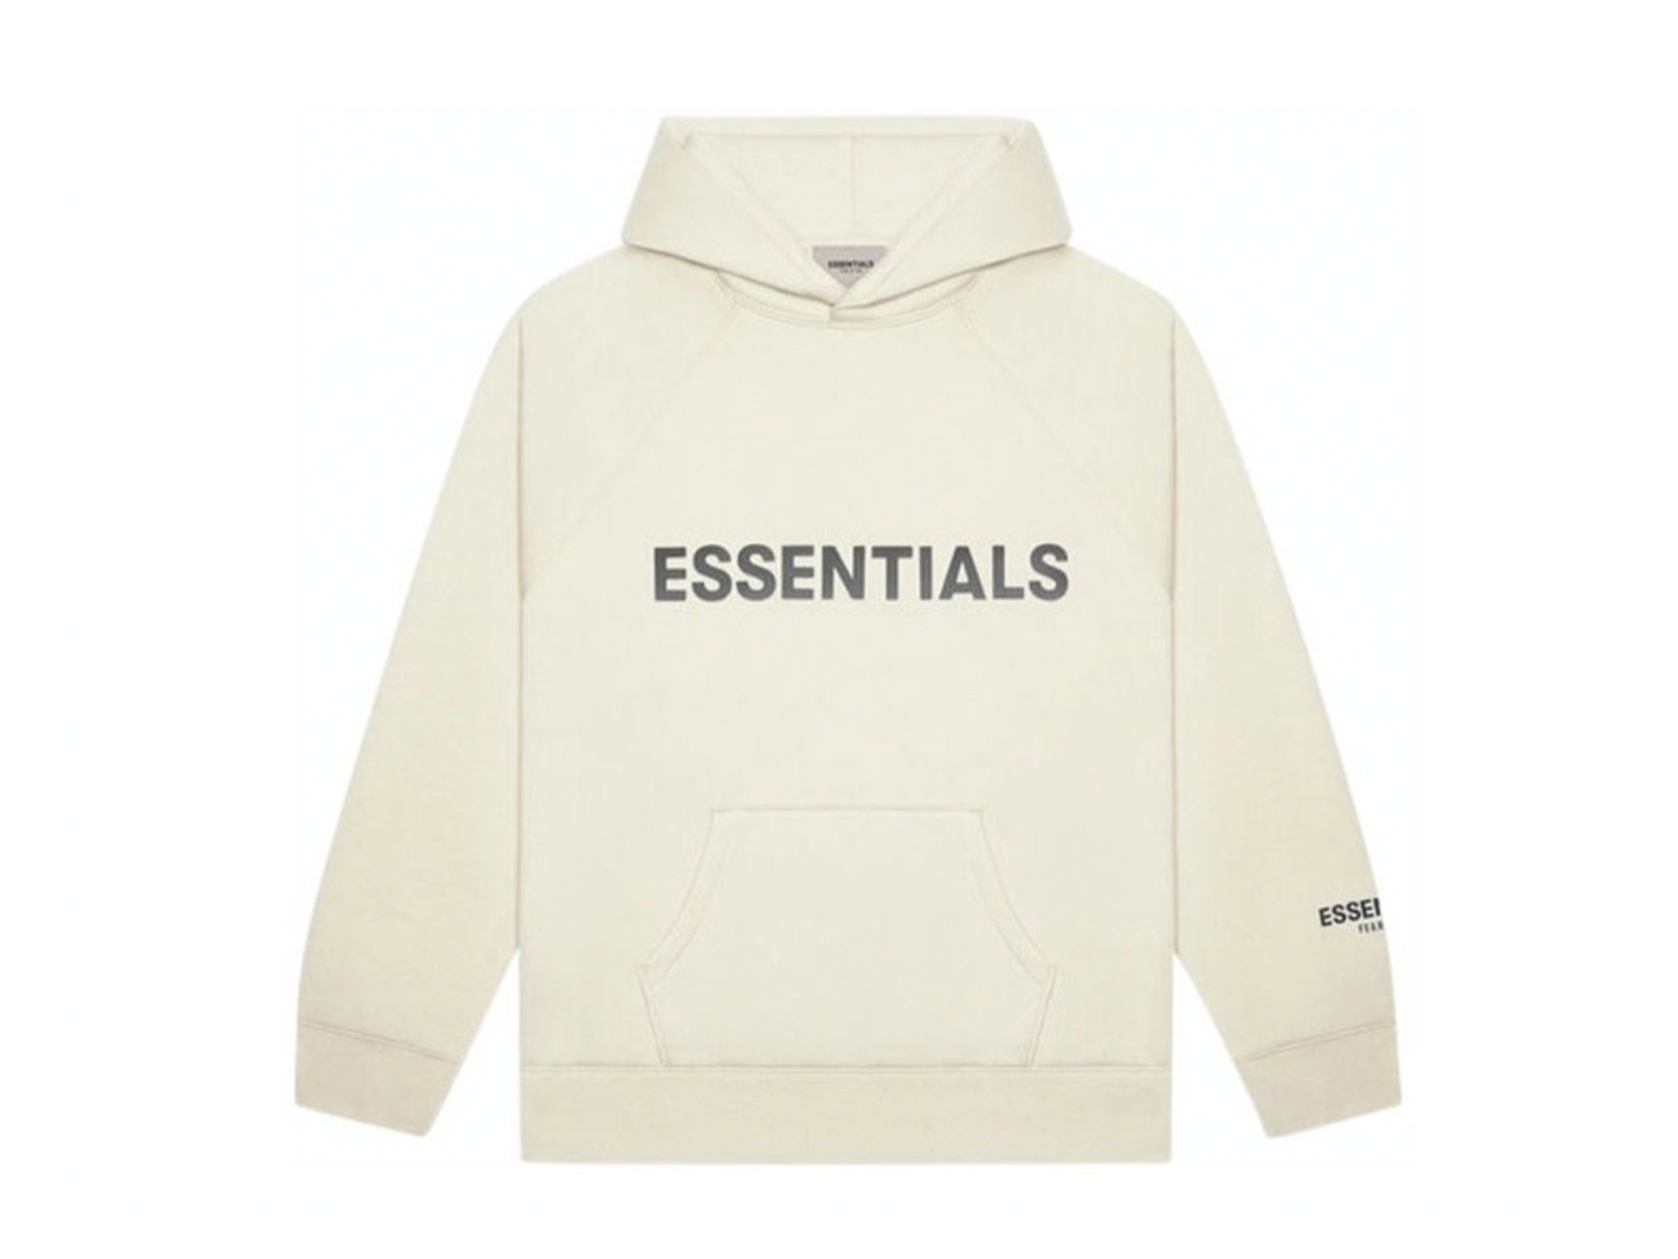 Double Boxed hoodie 209.99 FEAR OF GOD ESSENTIALS SS20 PULLOVER HOODIE BUTTERCREAM Double Boxed